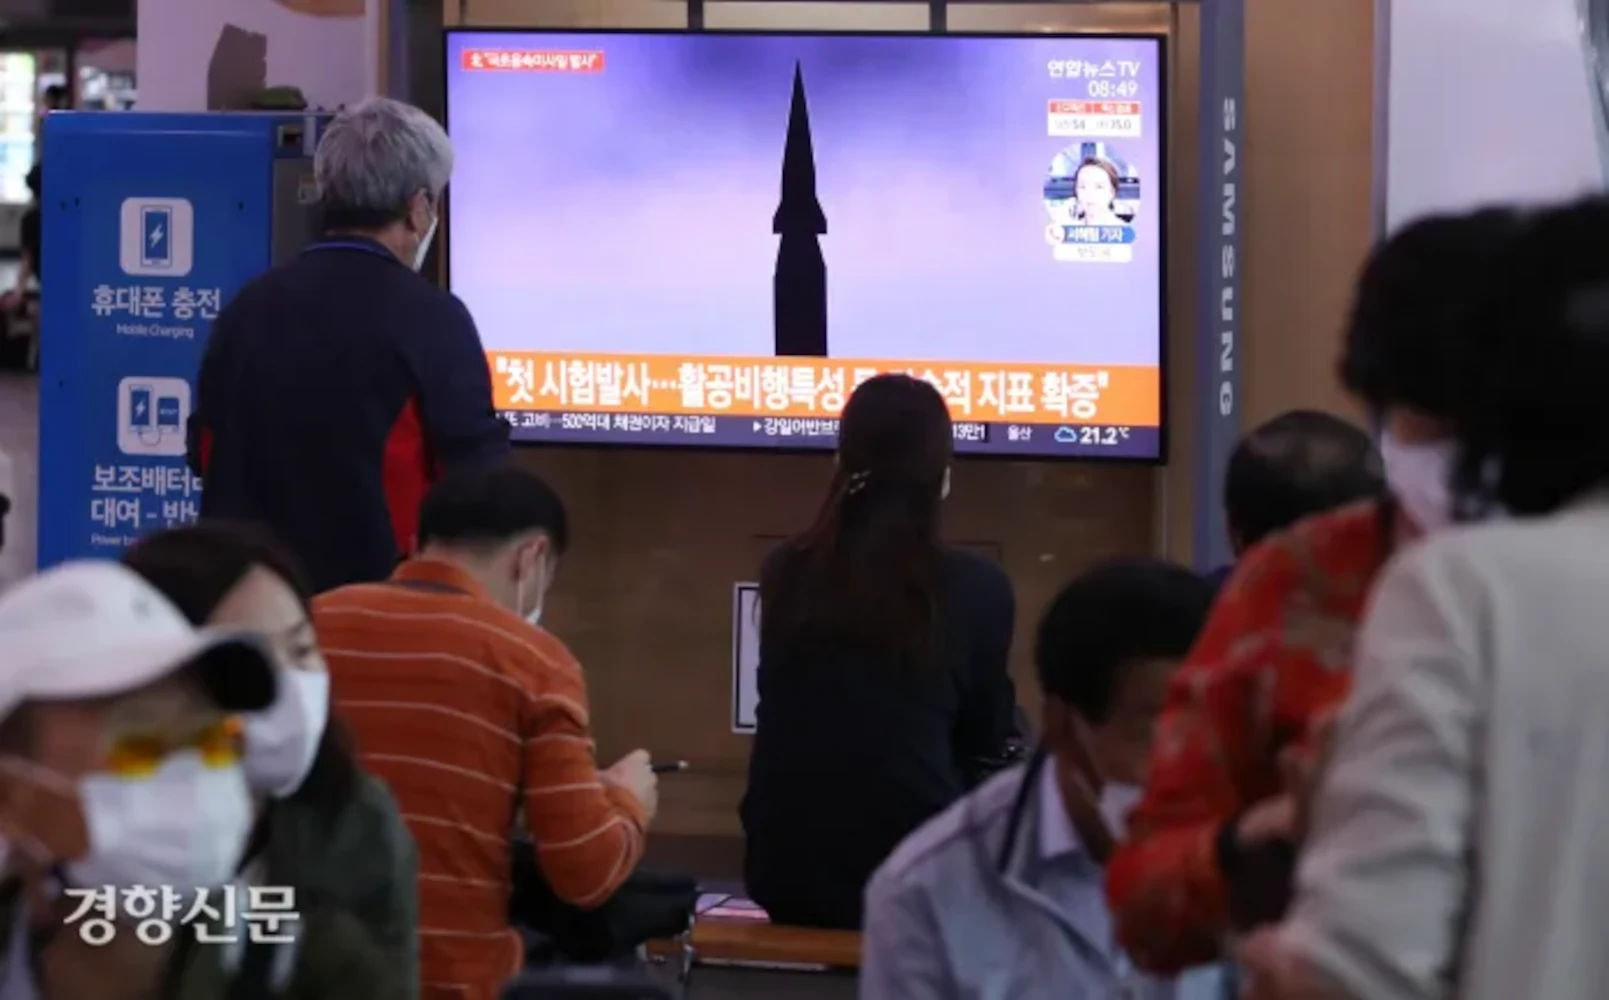 North Korea test-fires ballistic missile into the sea, presumed to be SLBM